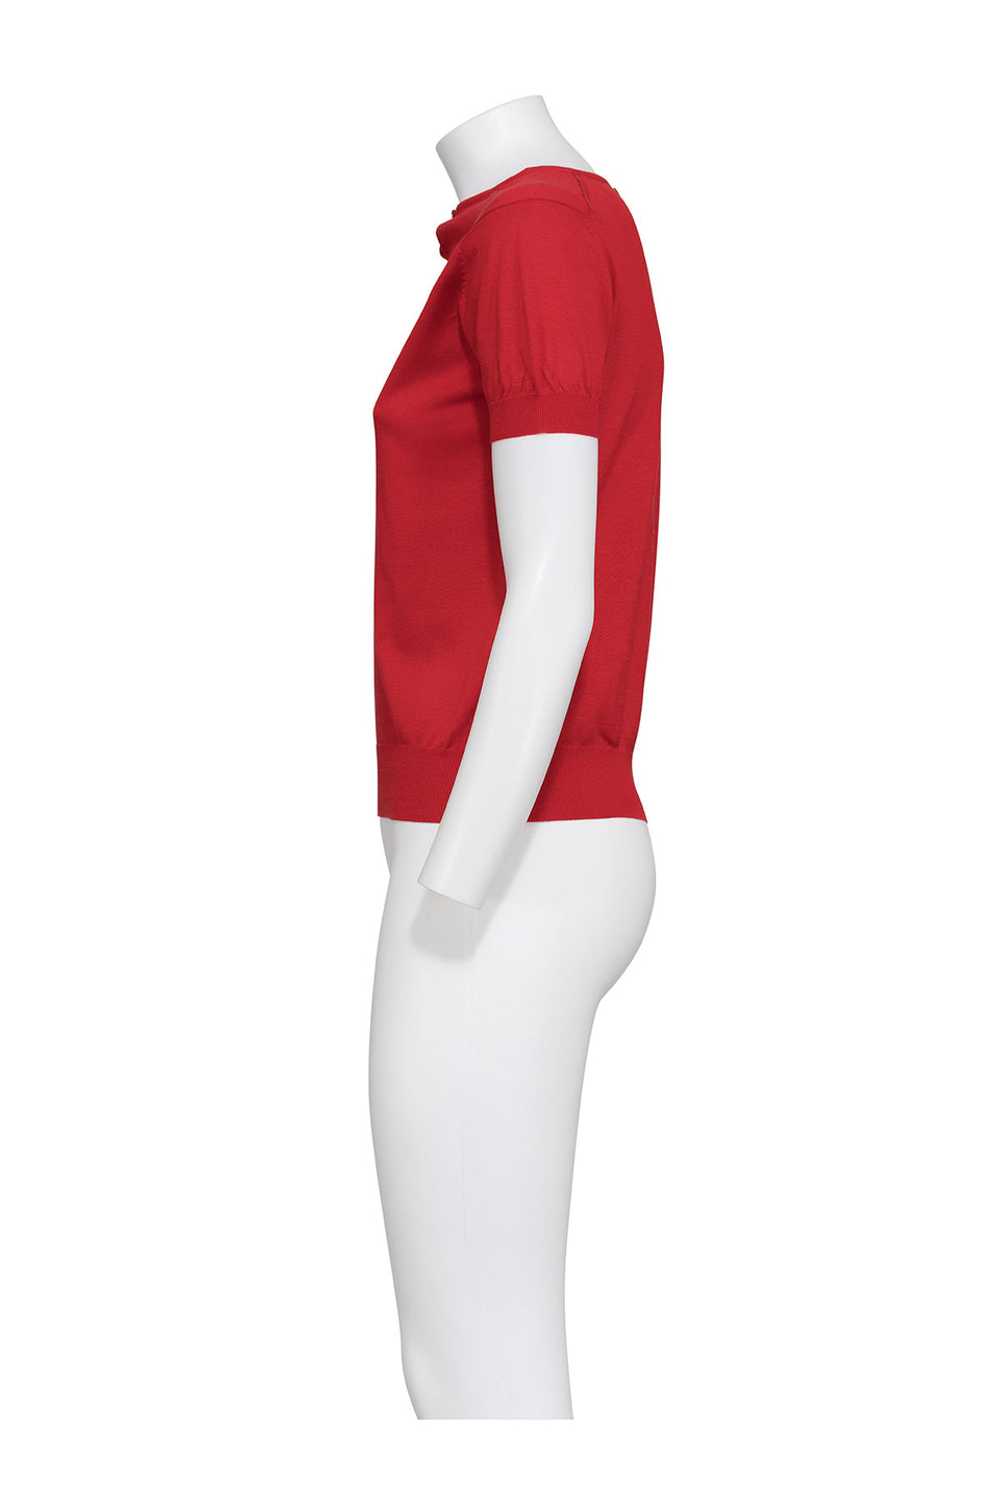 MAISON MARTIN MARGIELA 00's KNITTED TWIN TOP - image 3